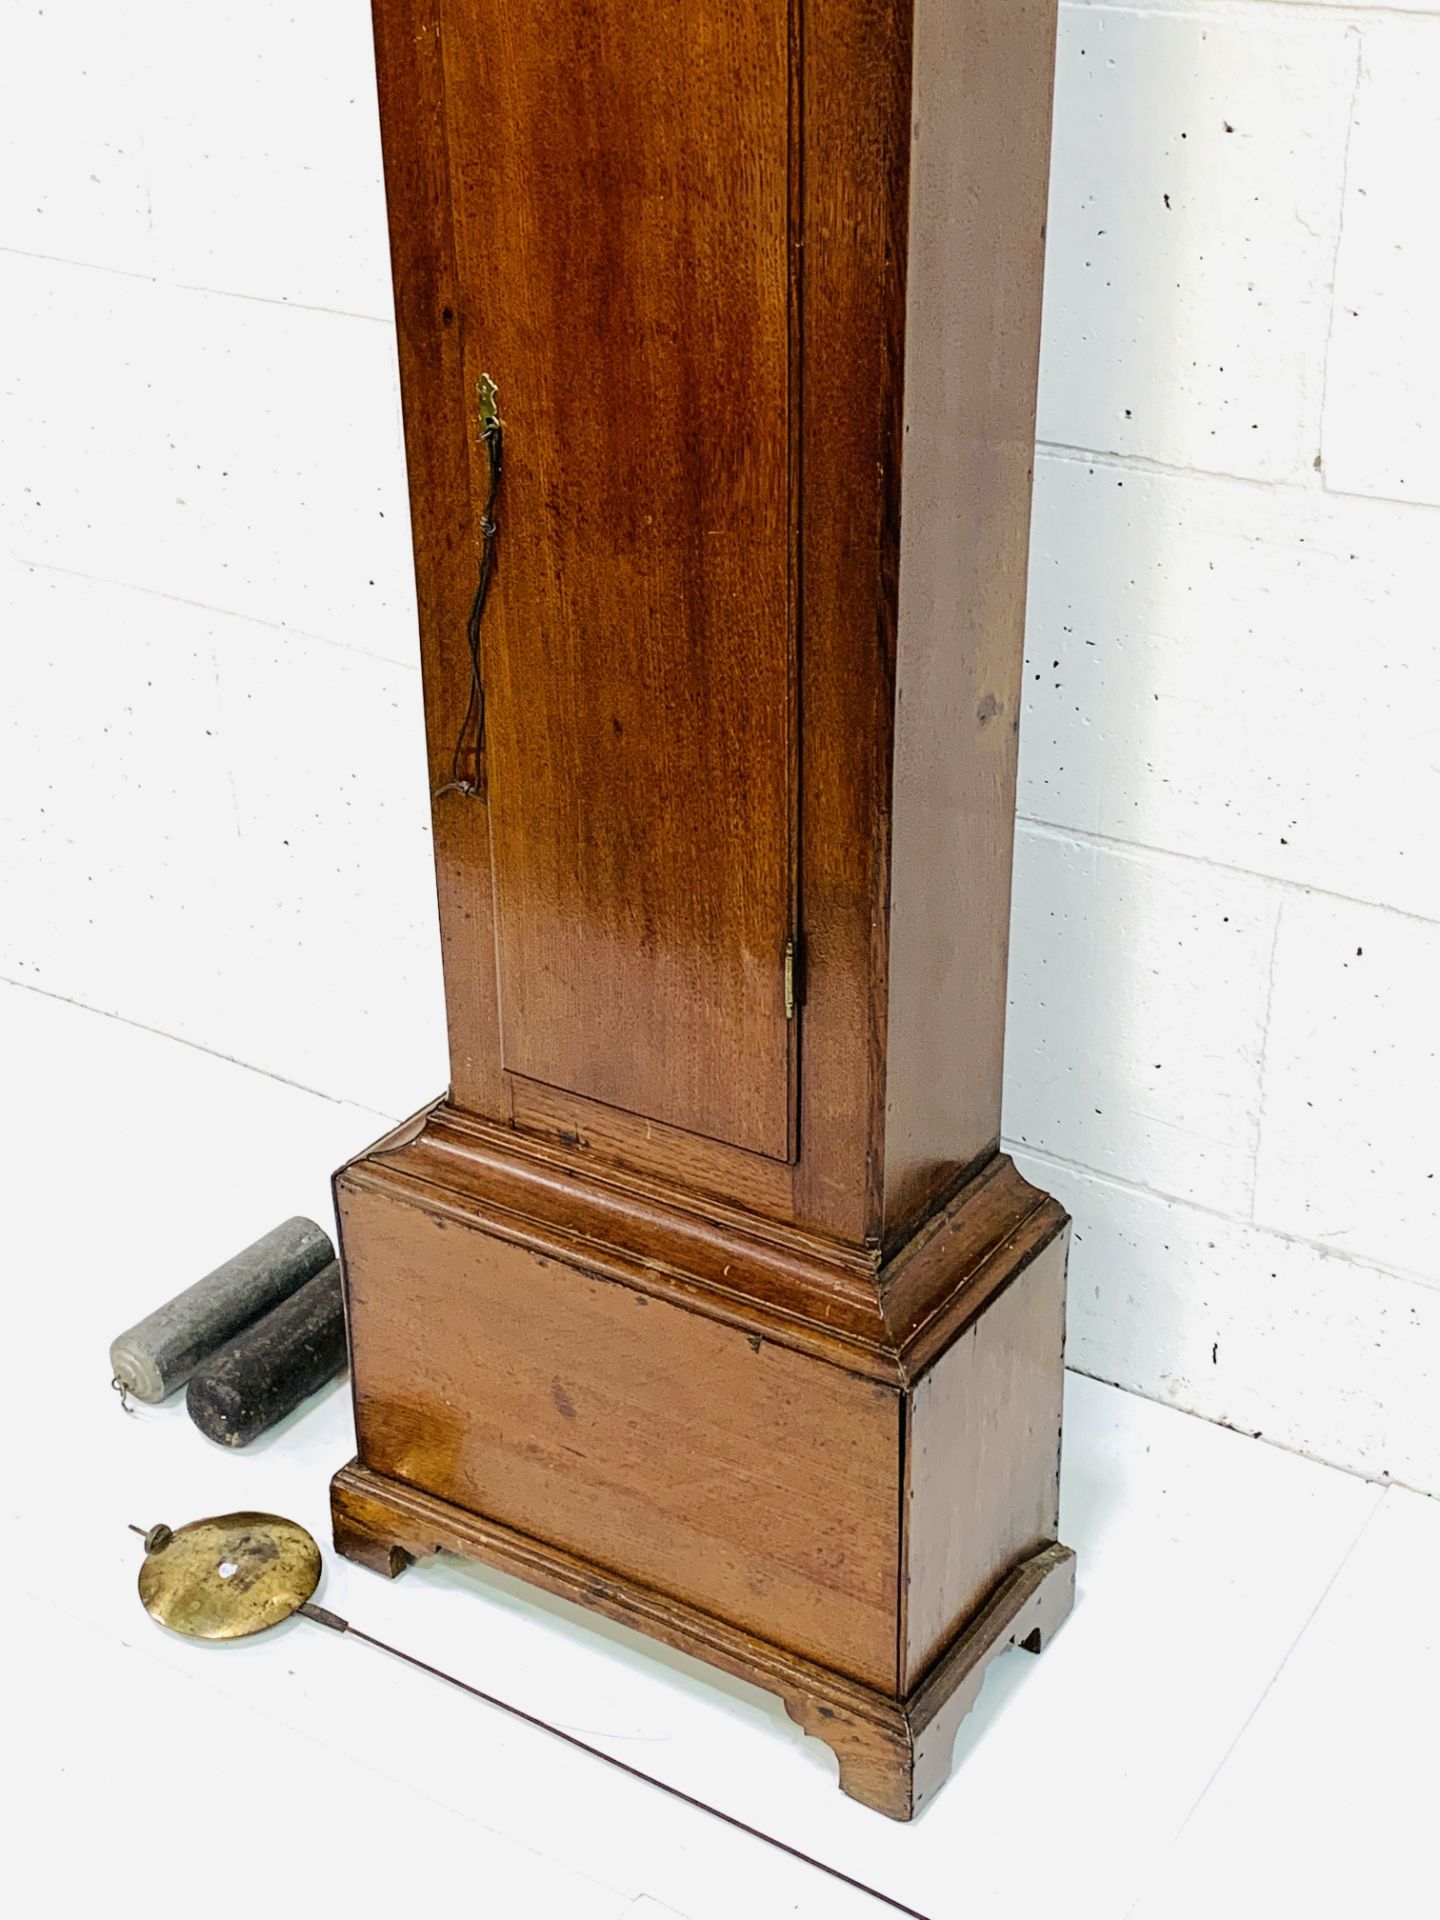 Mahogany long case clock by Clarke of Long Buckby, movement by Wilson - Image 5 of 9